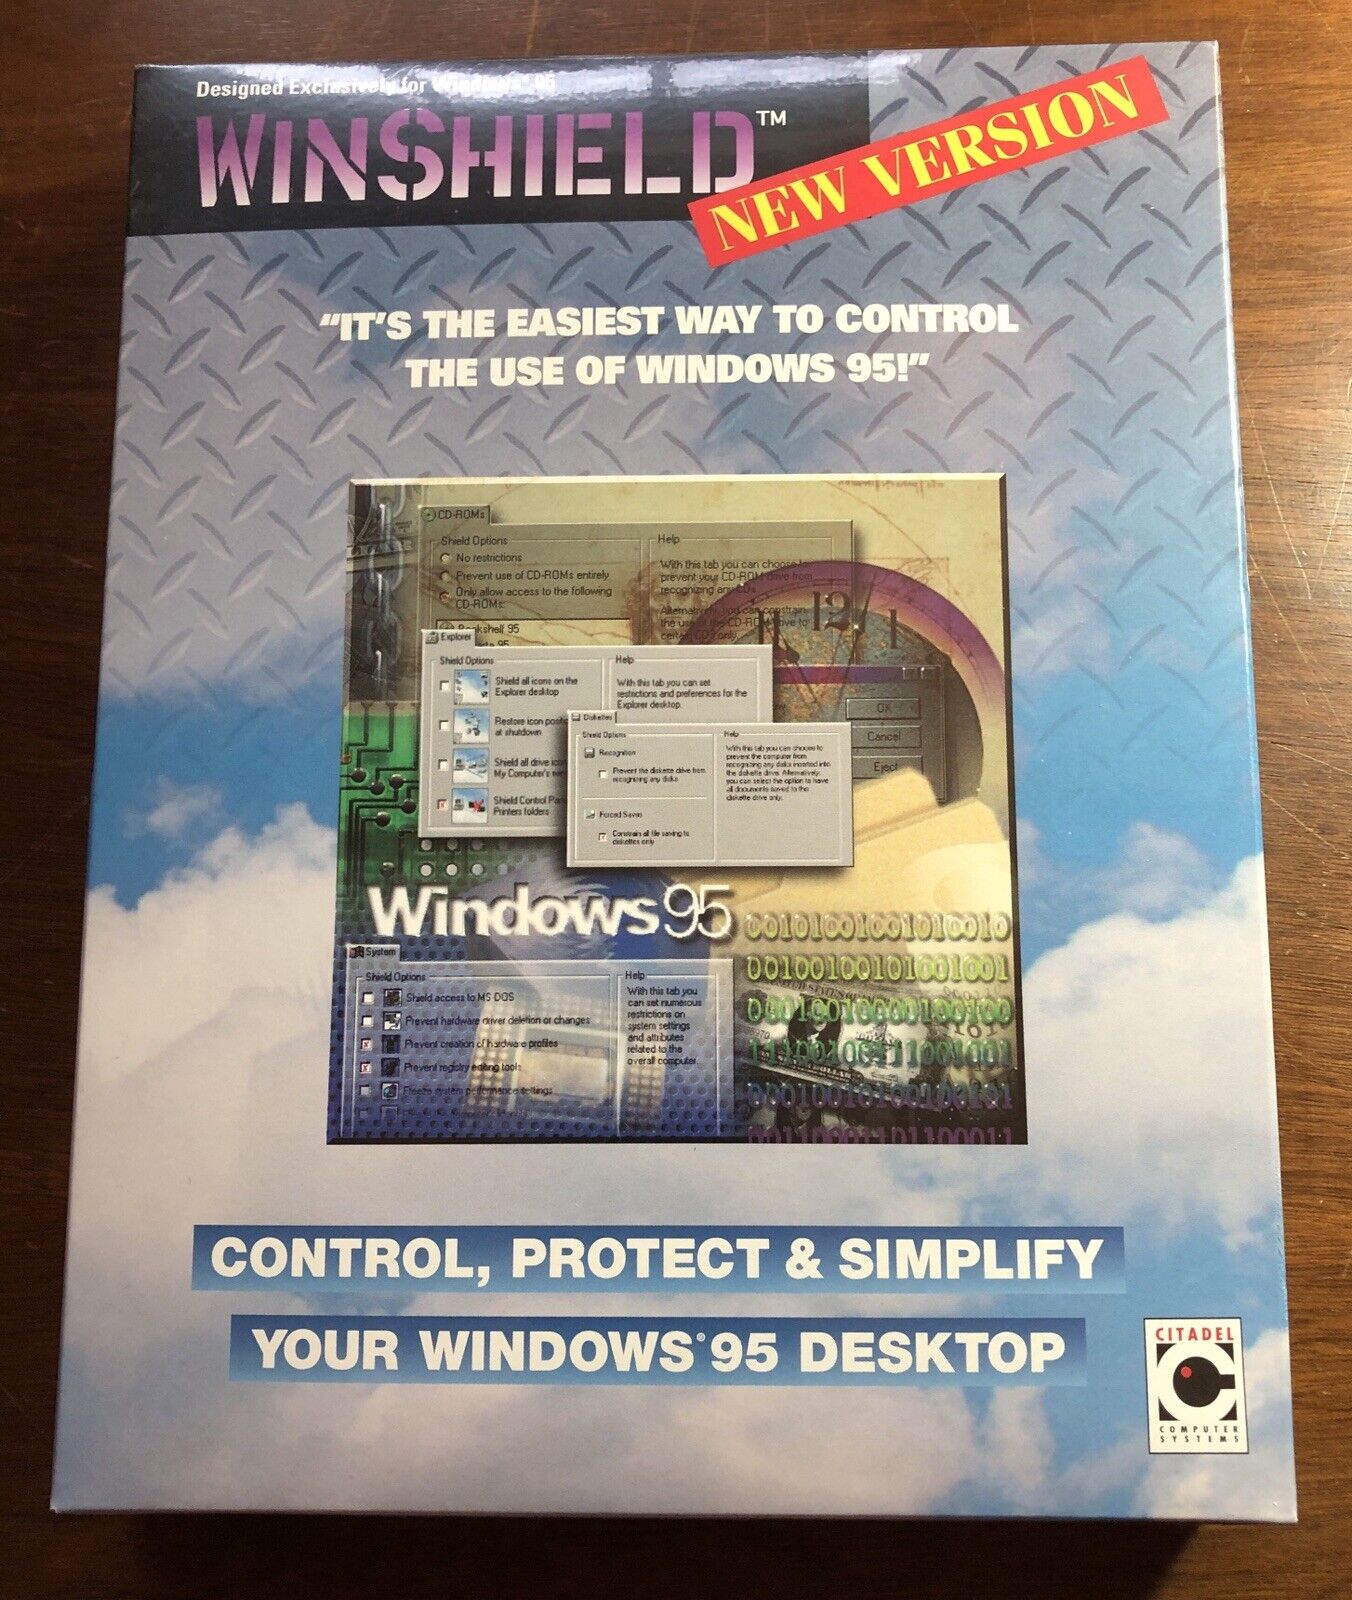 Windshield by Citadel for Windows 95 New Sealed Box 1997 - RARE Vintage Software